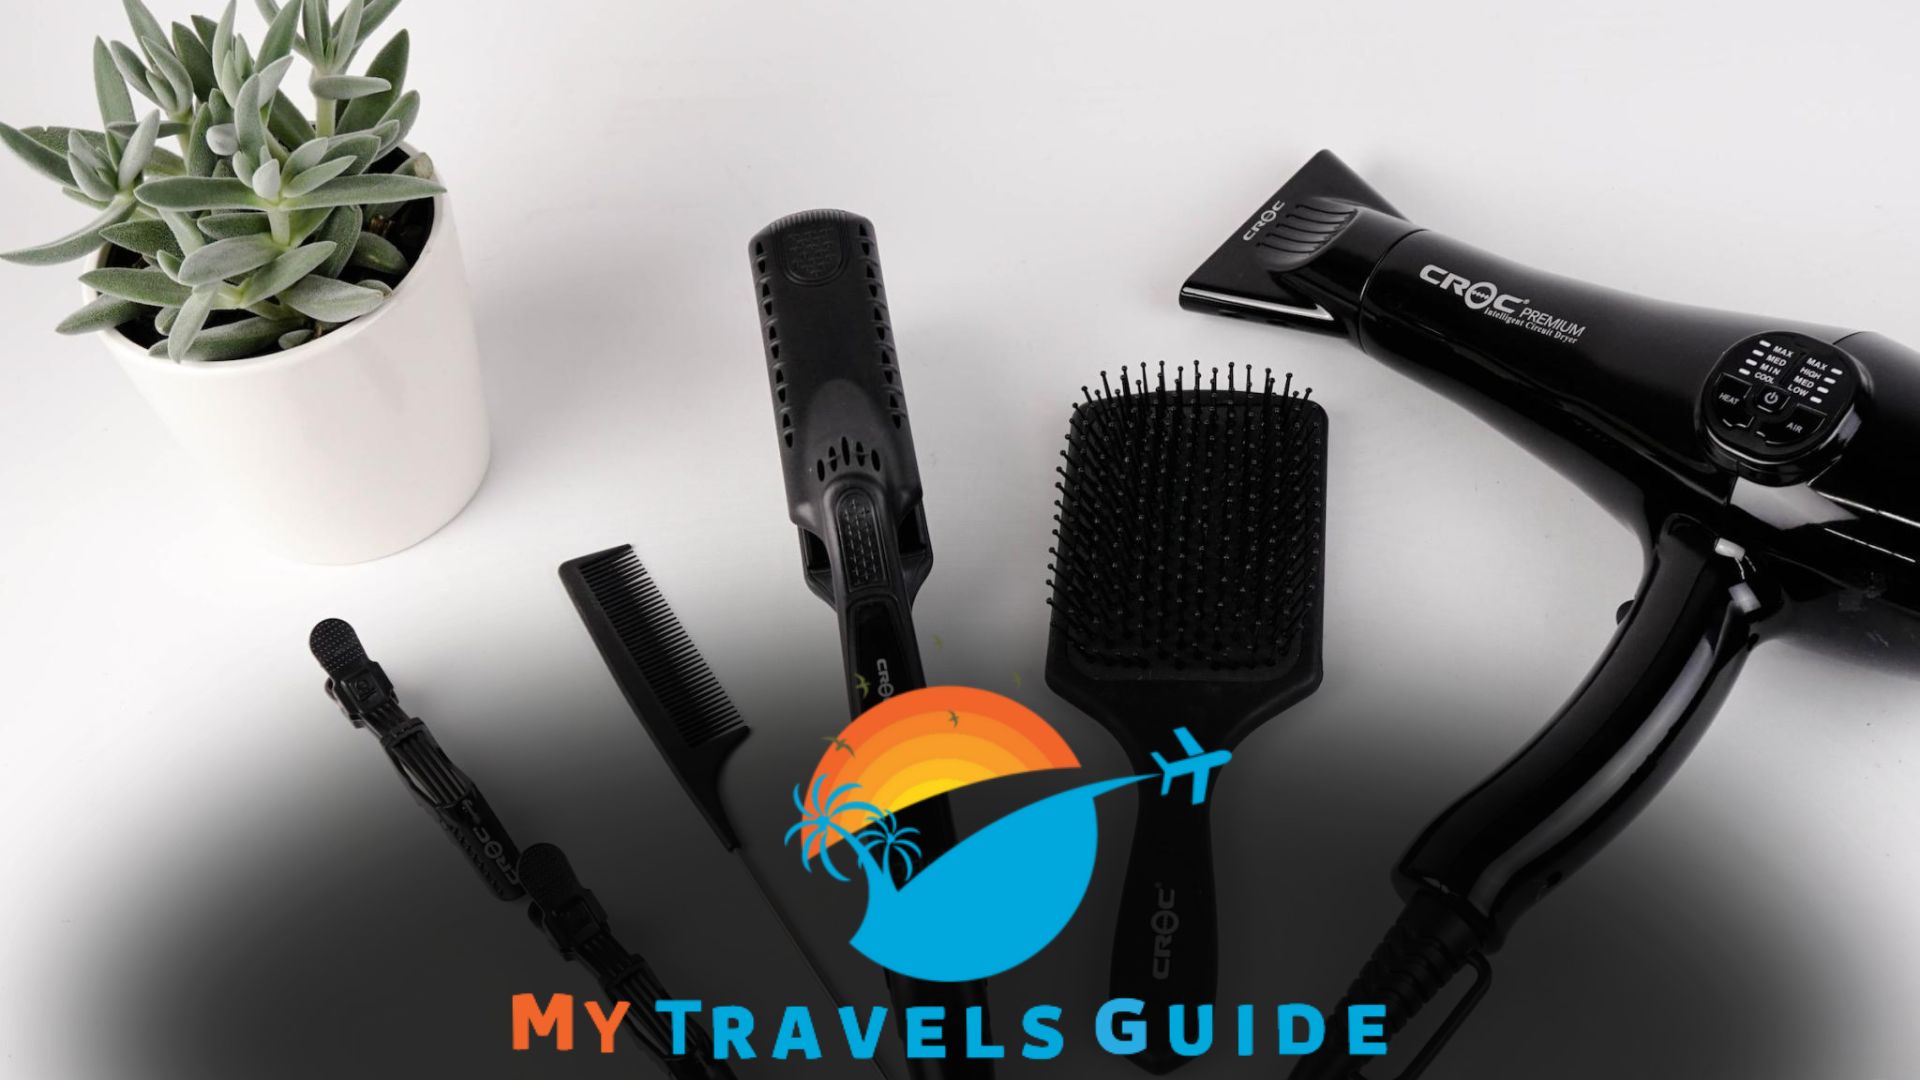 Can I Take a Hair Dryer in My Carry-On? Find out the Rules and Regulations